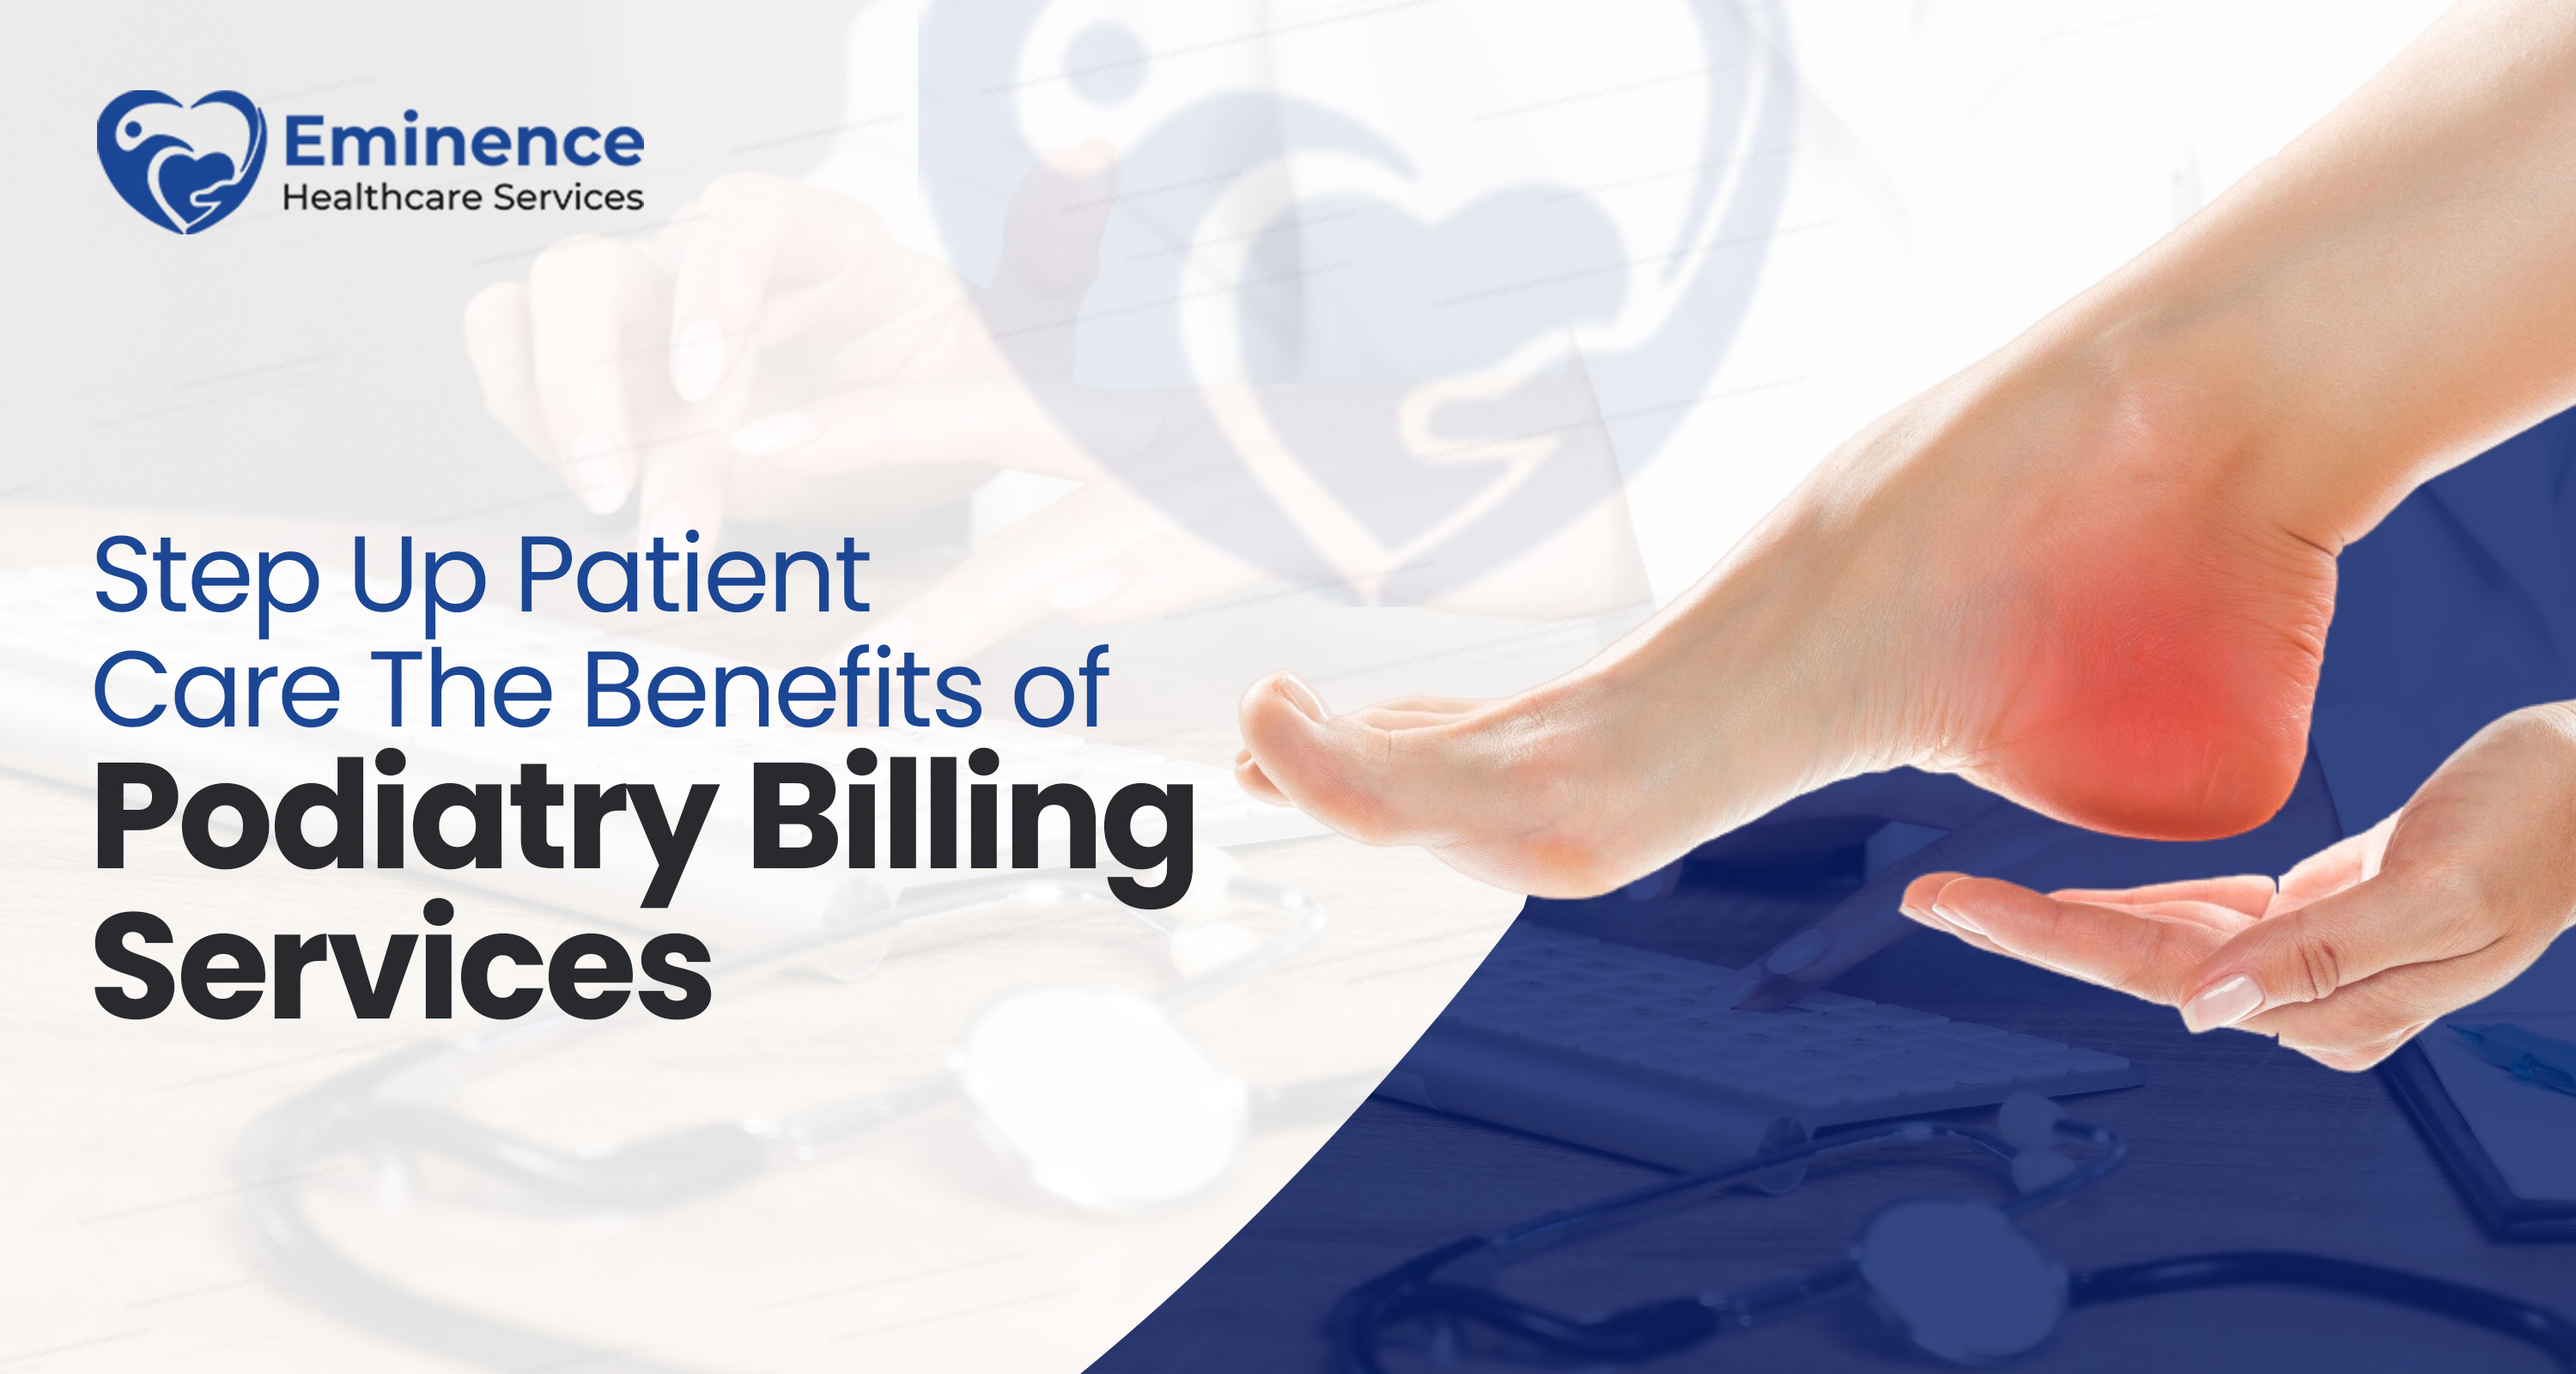 Step Up Patient Care: The Benefits of Podiatry Billing Services